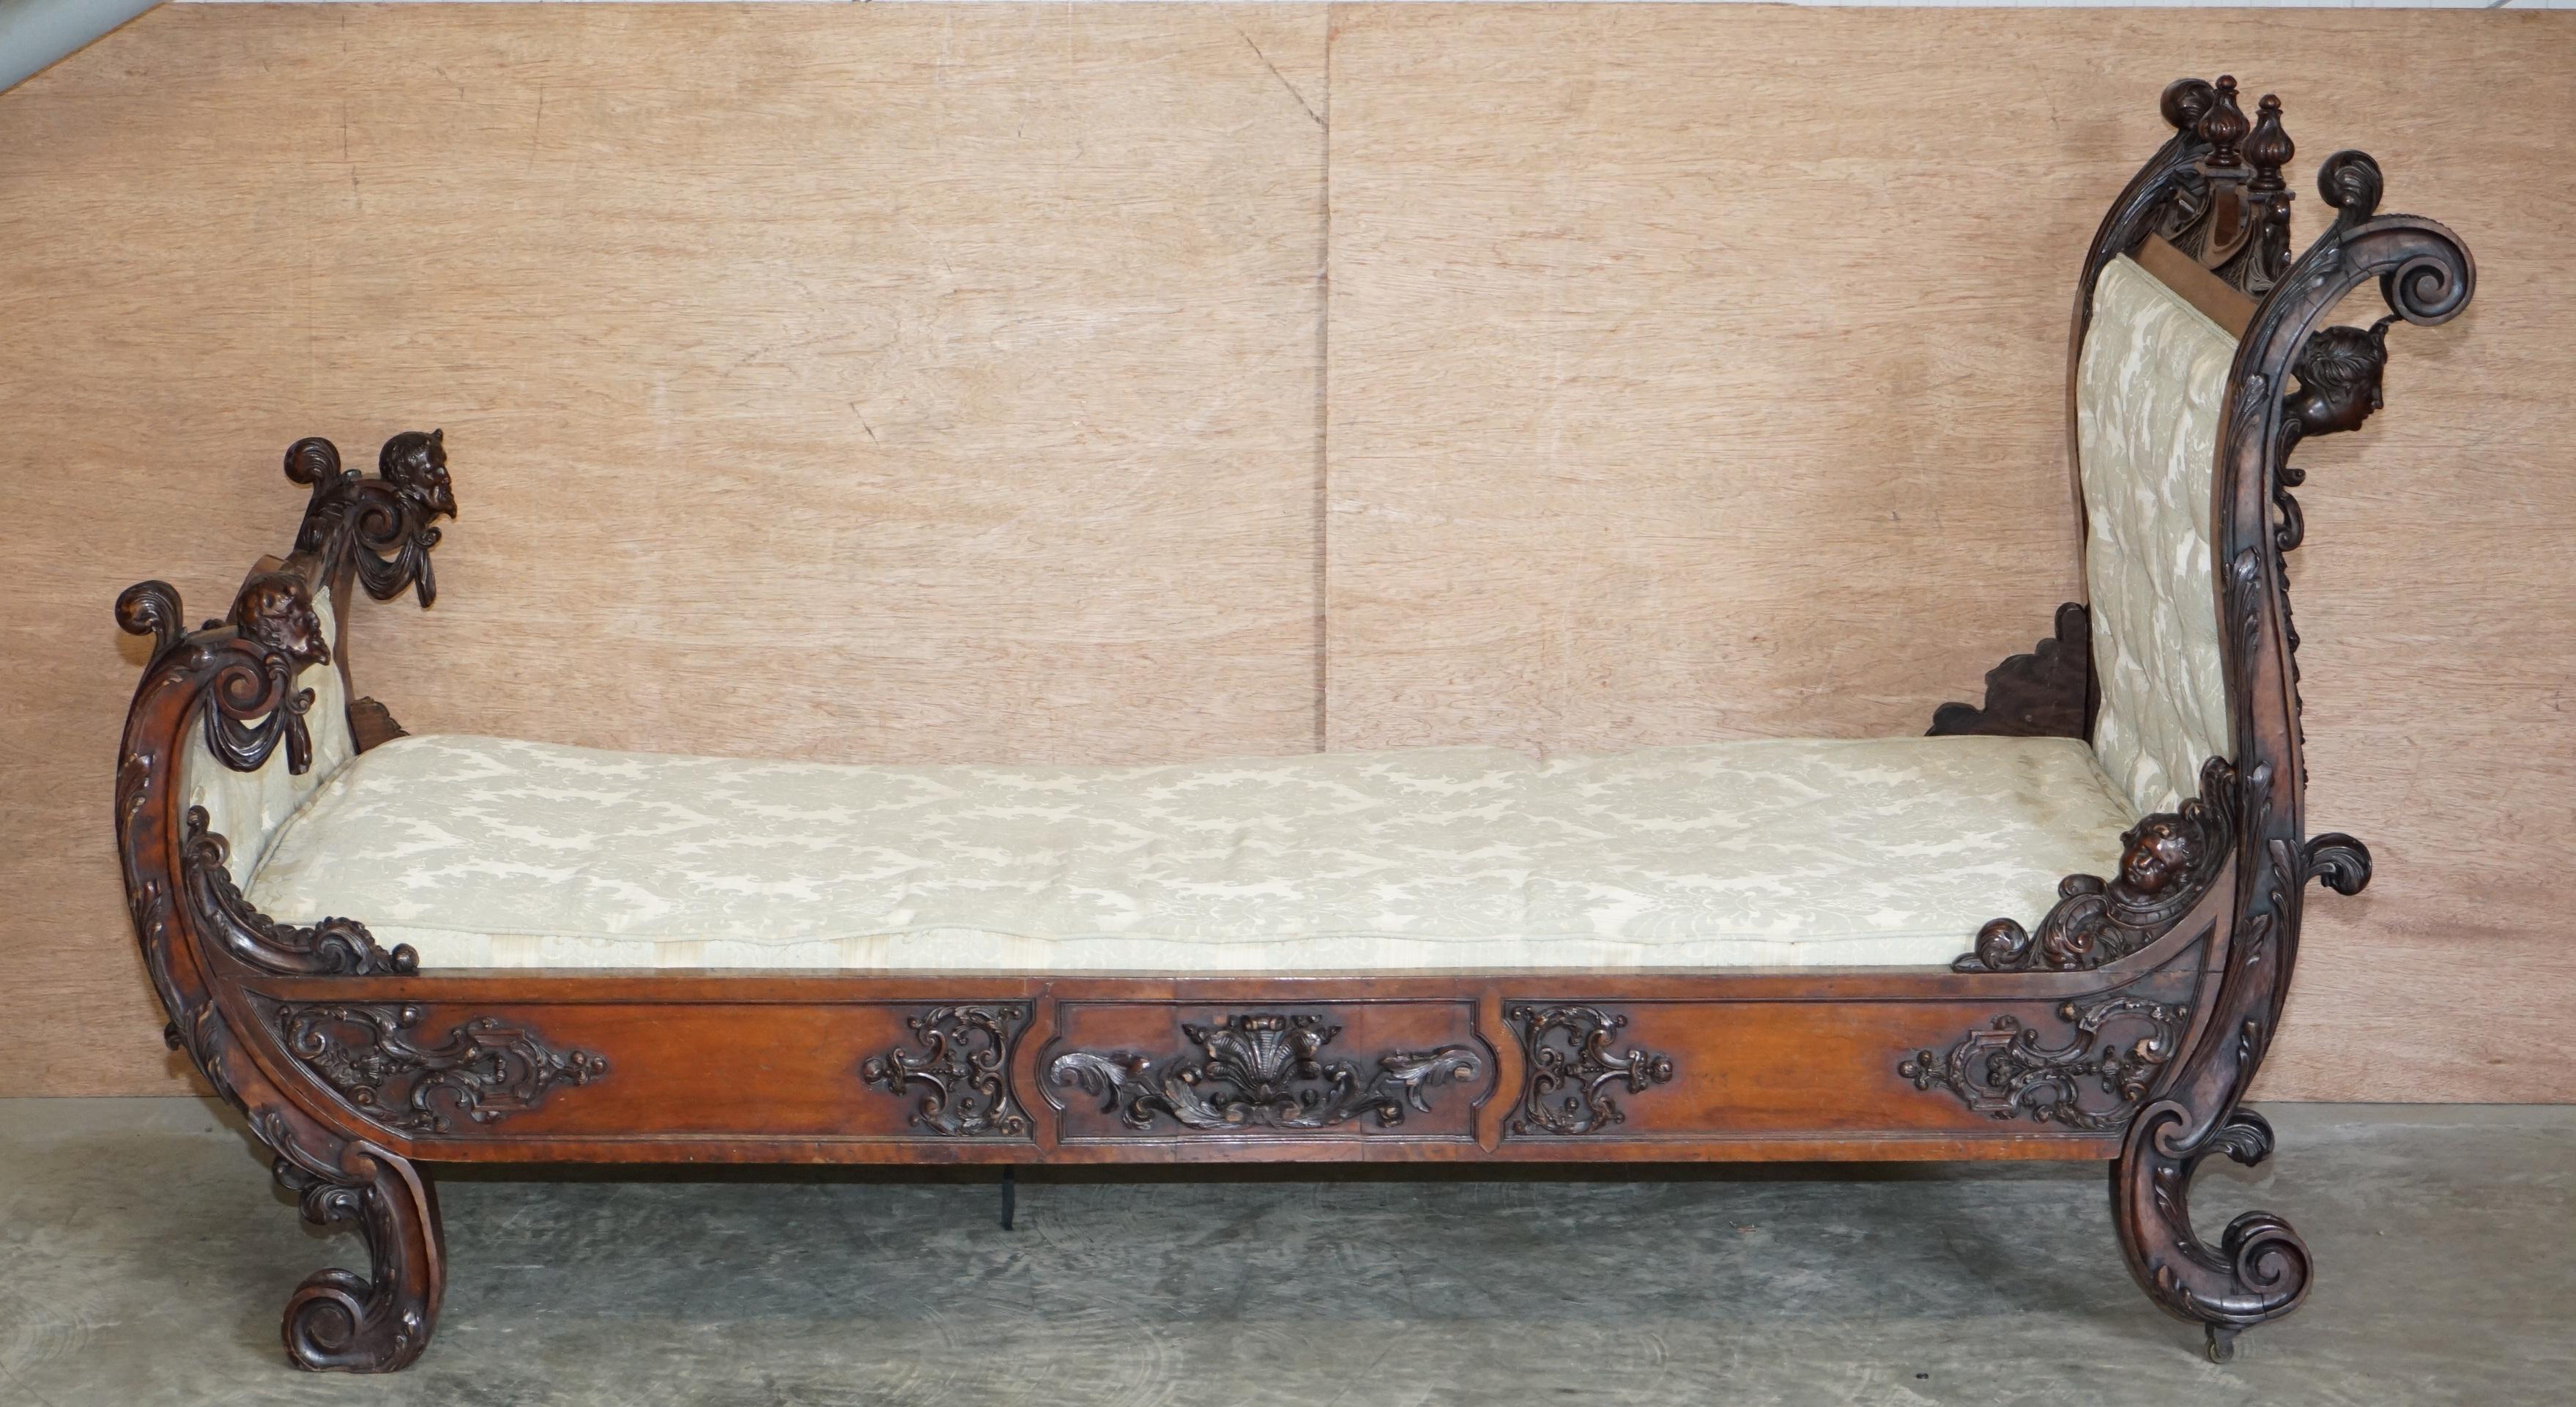 We are delighted to offer for sale this exceptionally rare Circa 1840-1860 hand carved walnut Italian daybed with cherub putti decoration and chesterfield tufting

What a find! This has to be the most decorative bed I have ever seen! It is carved